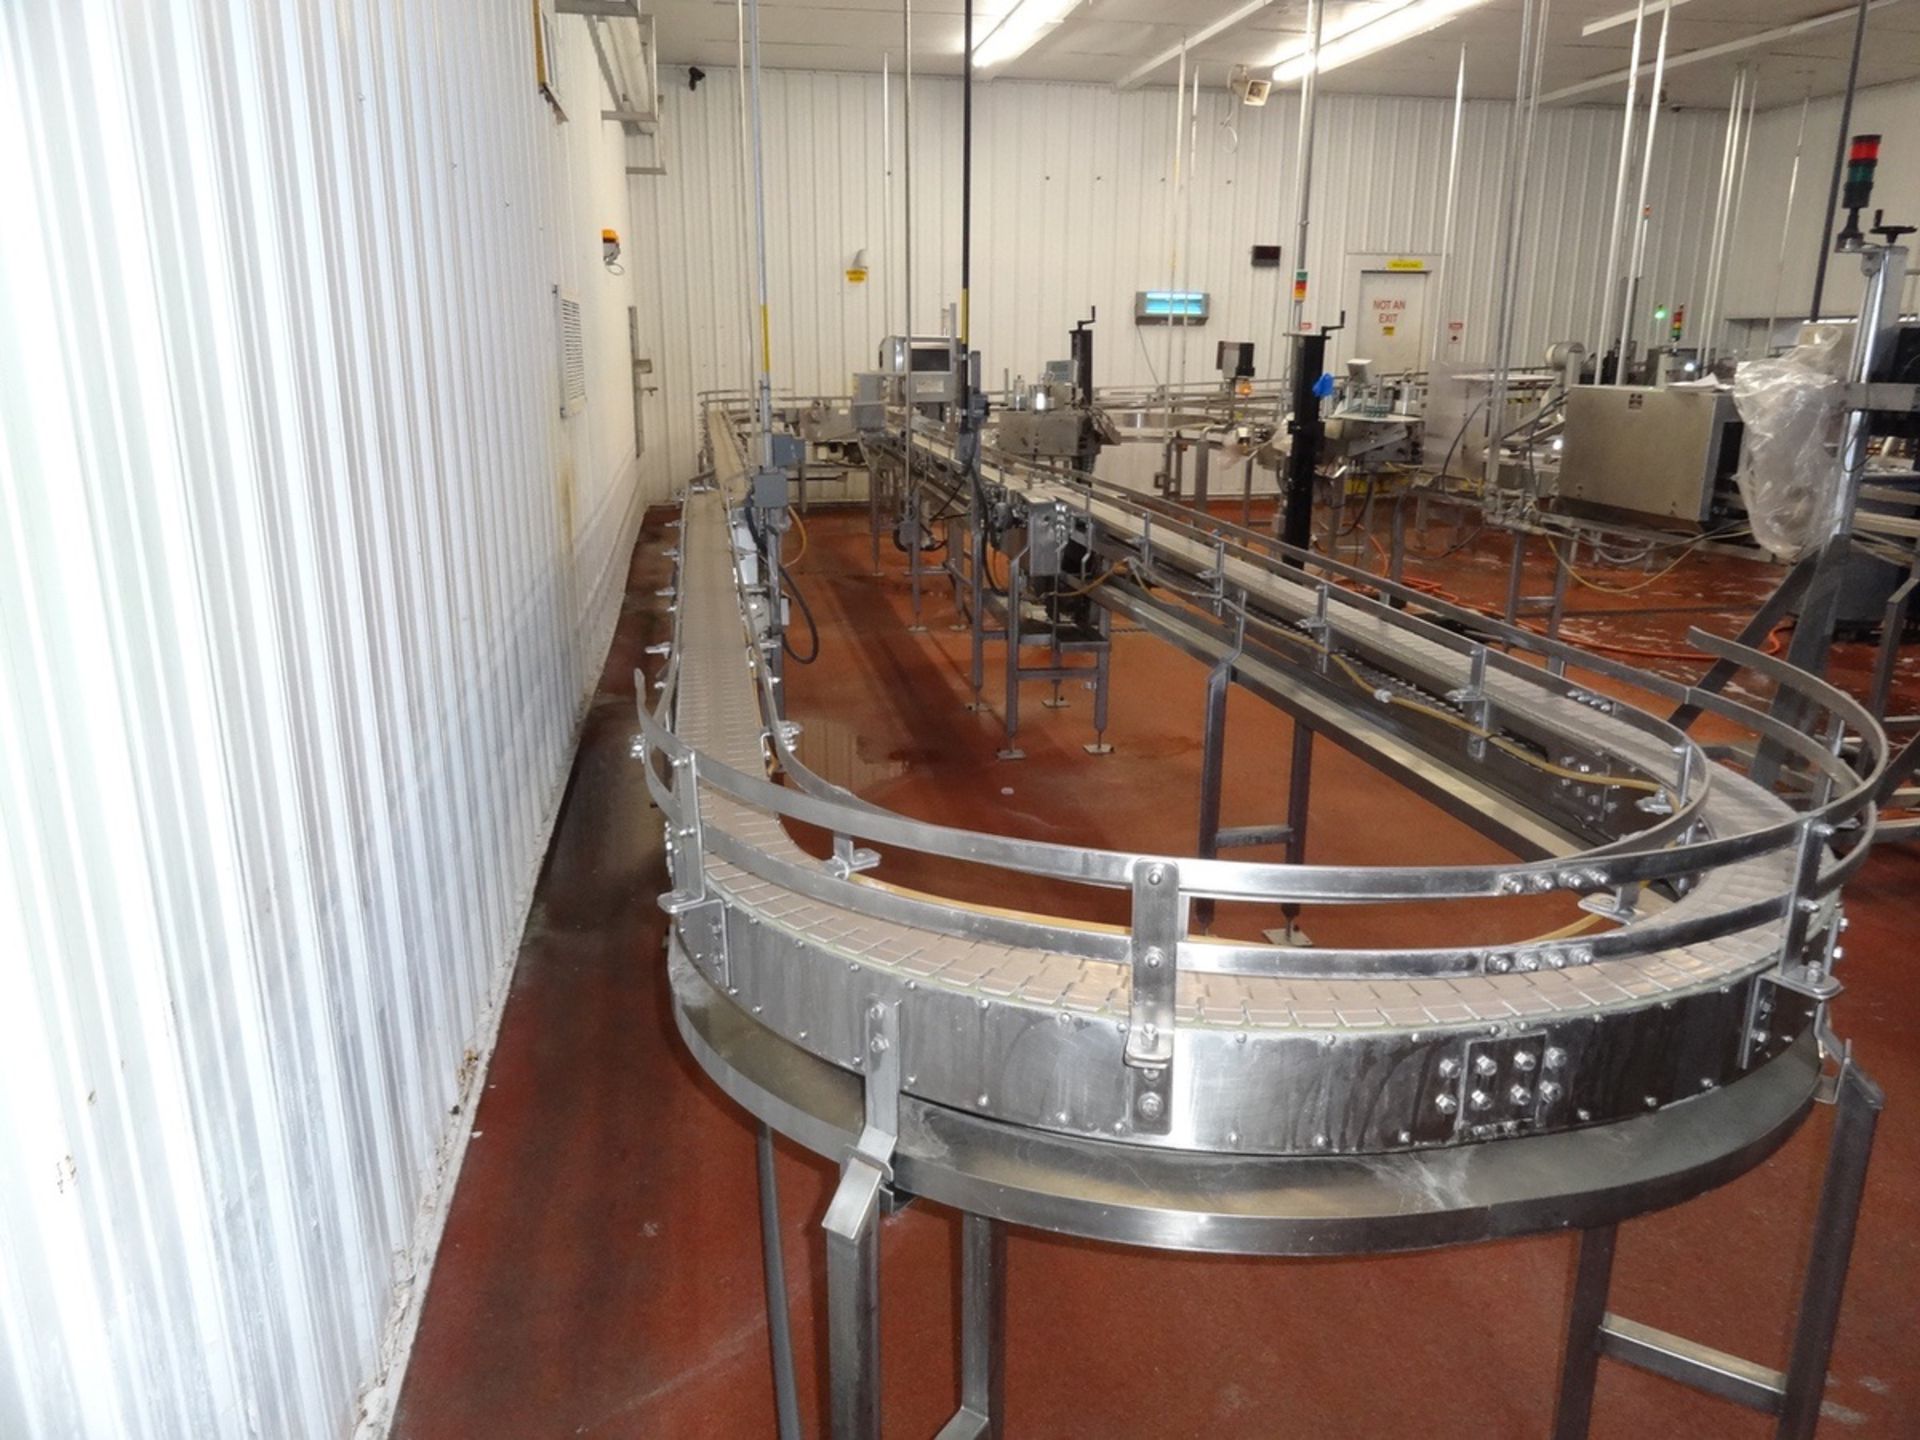 Custom Metal Designs 4 1/2" Tabletop Conveyor System, Includes approximately 140' s | Rig Fee $5500 - Image 3 of 4